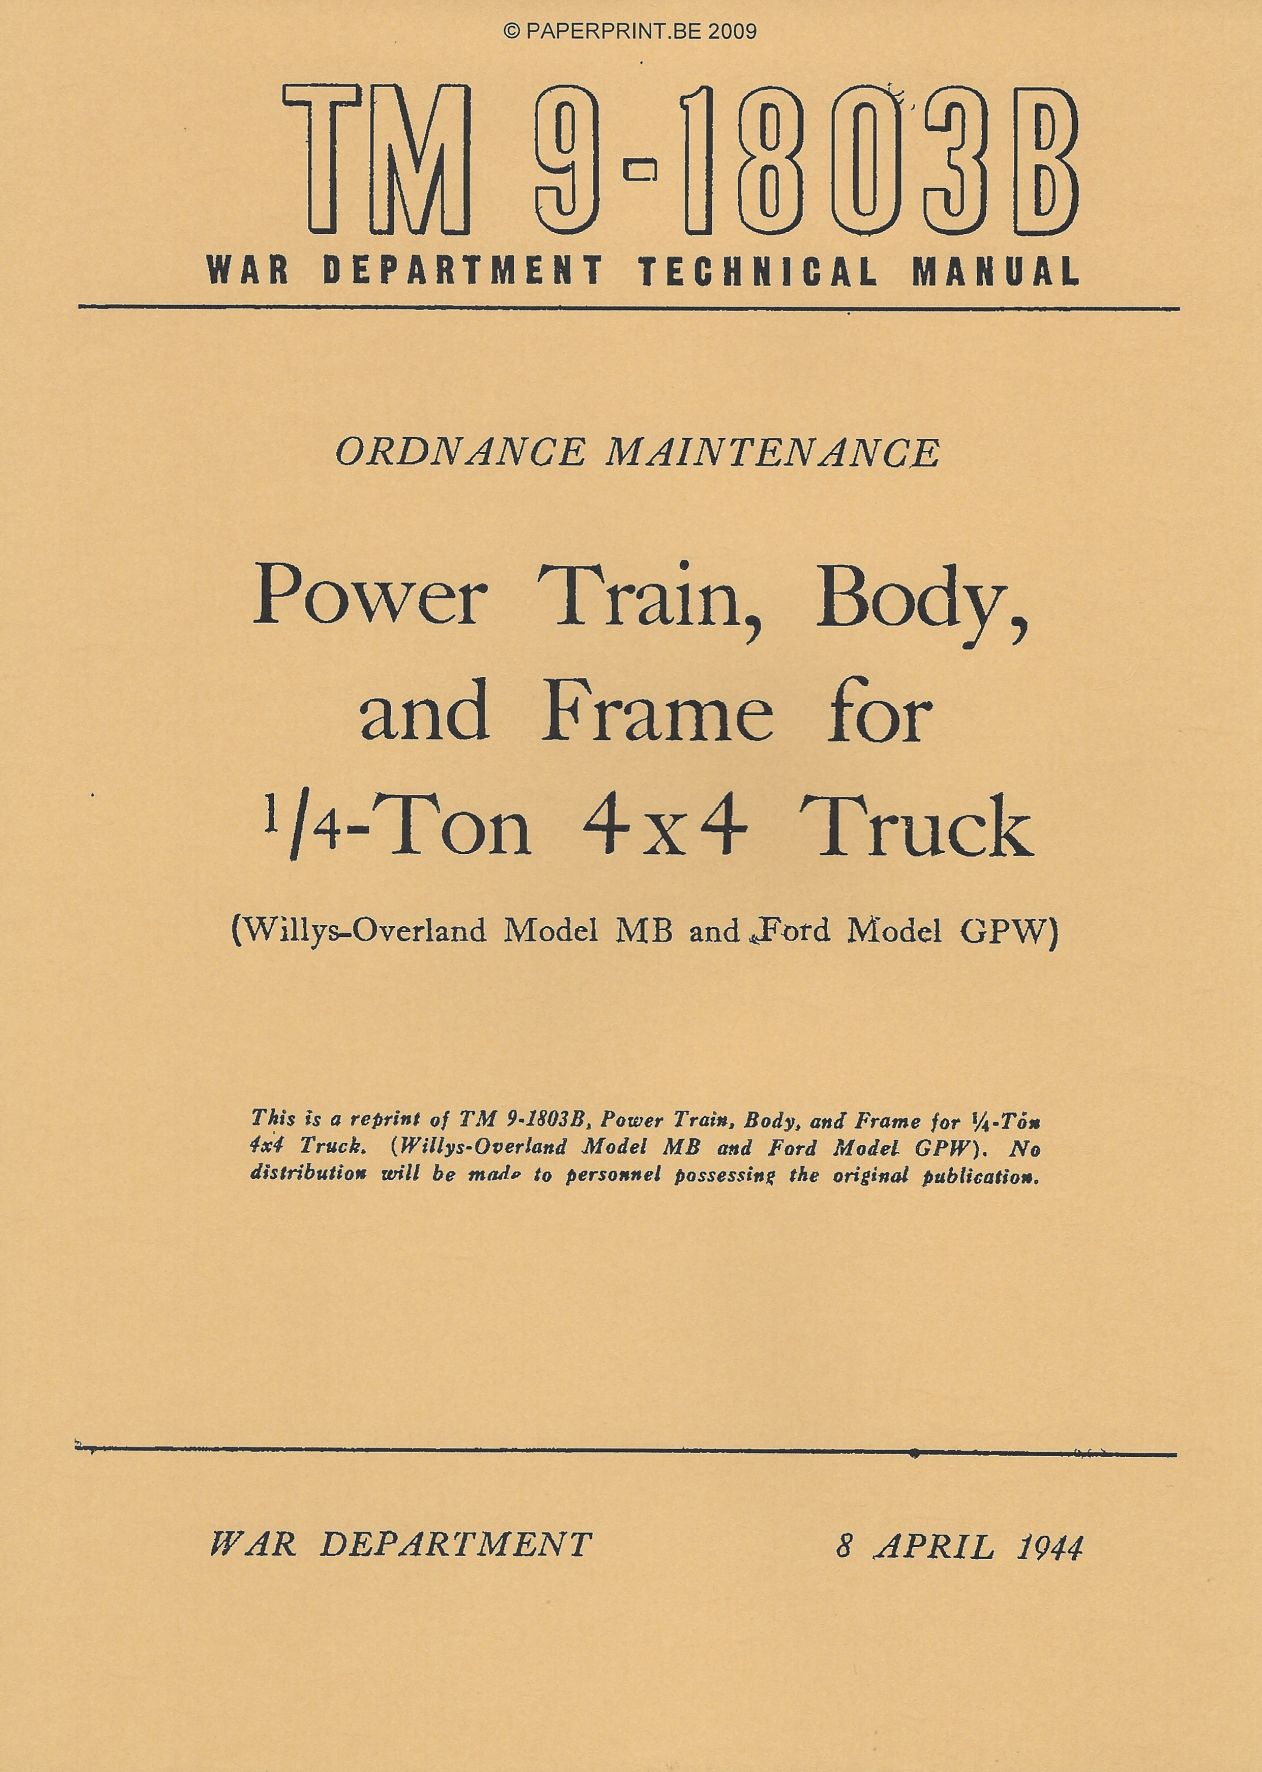 TM 9-1803B US POWER TRAIN, BODY AND FRAME FOR ¼ - TON 4x4 TRUCK